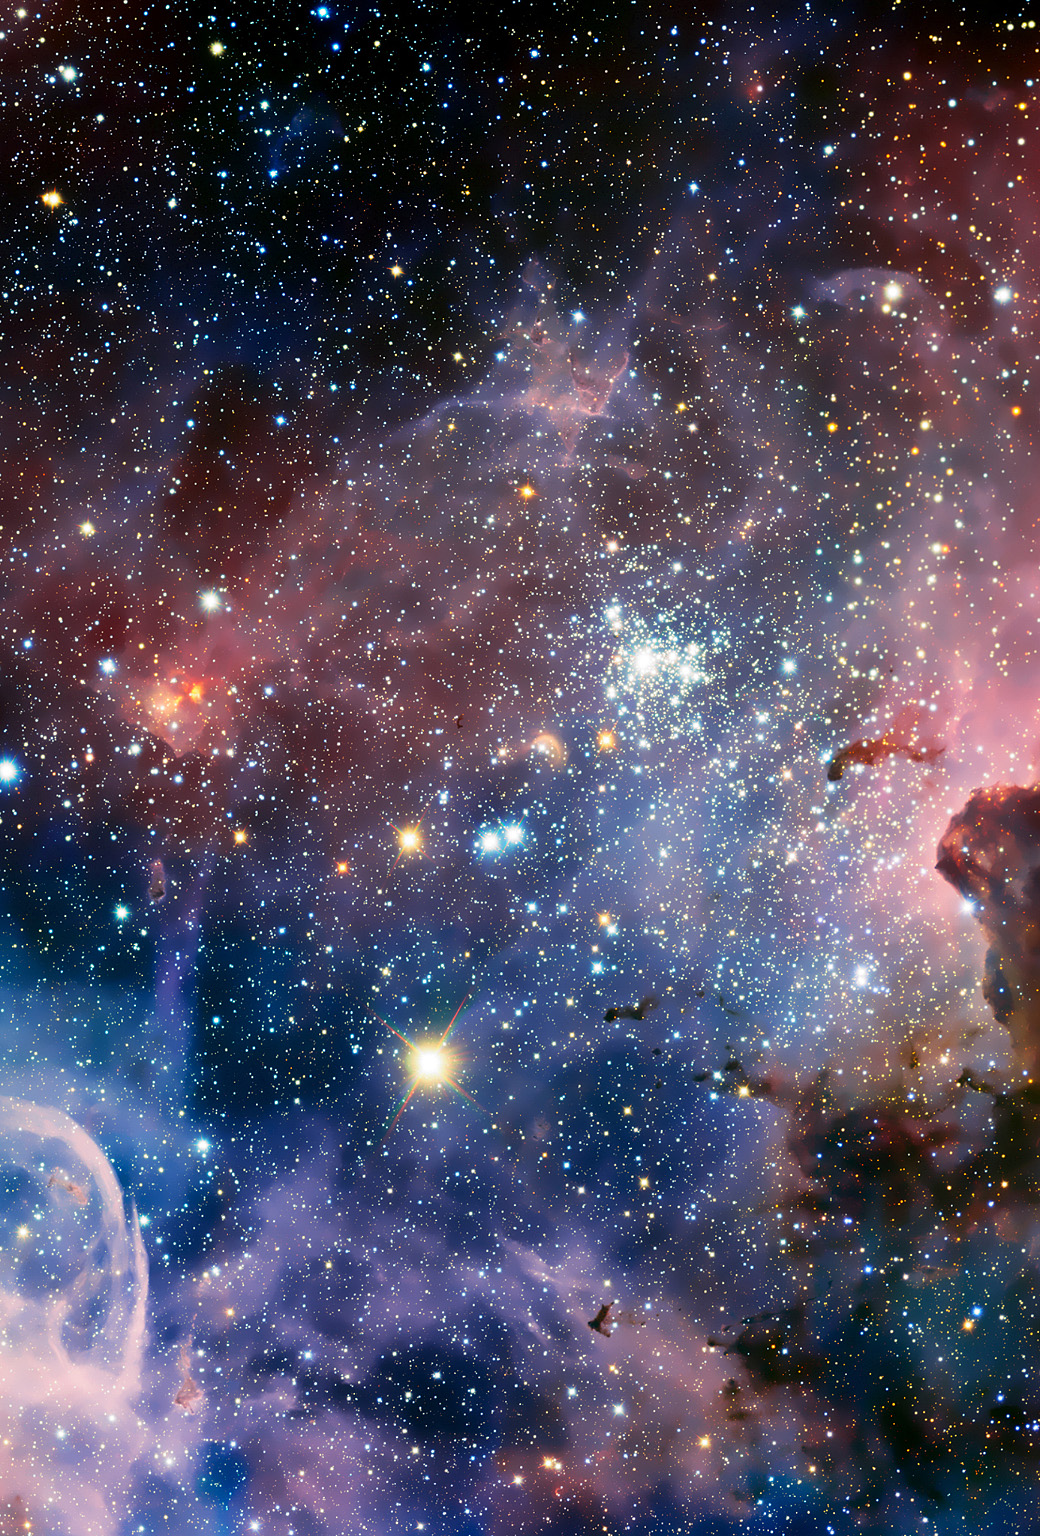 Hd space wallpapers iphone